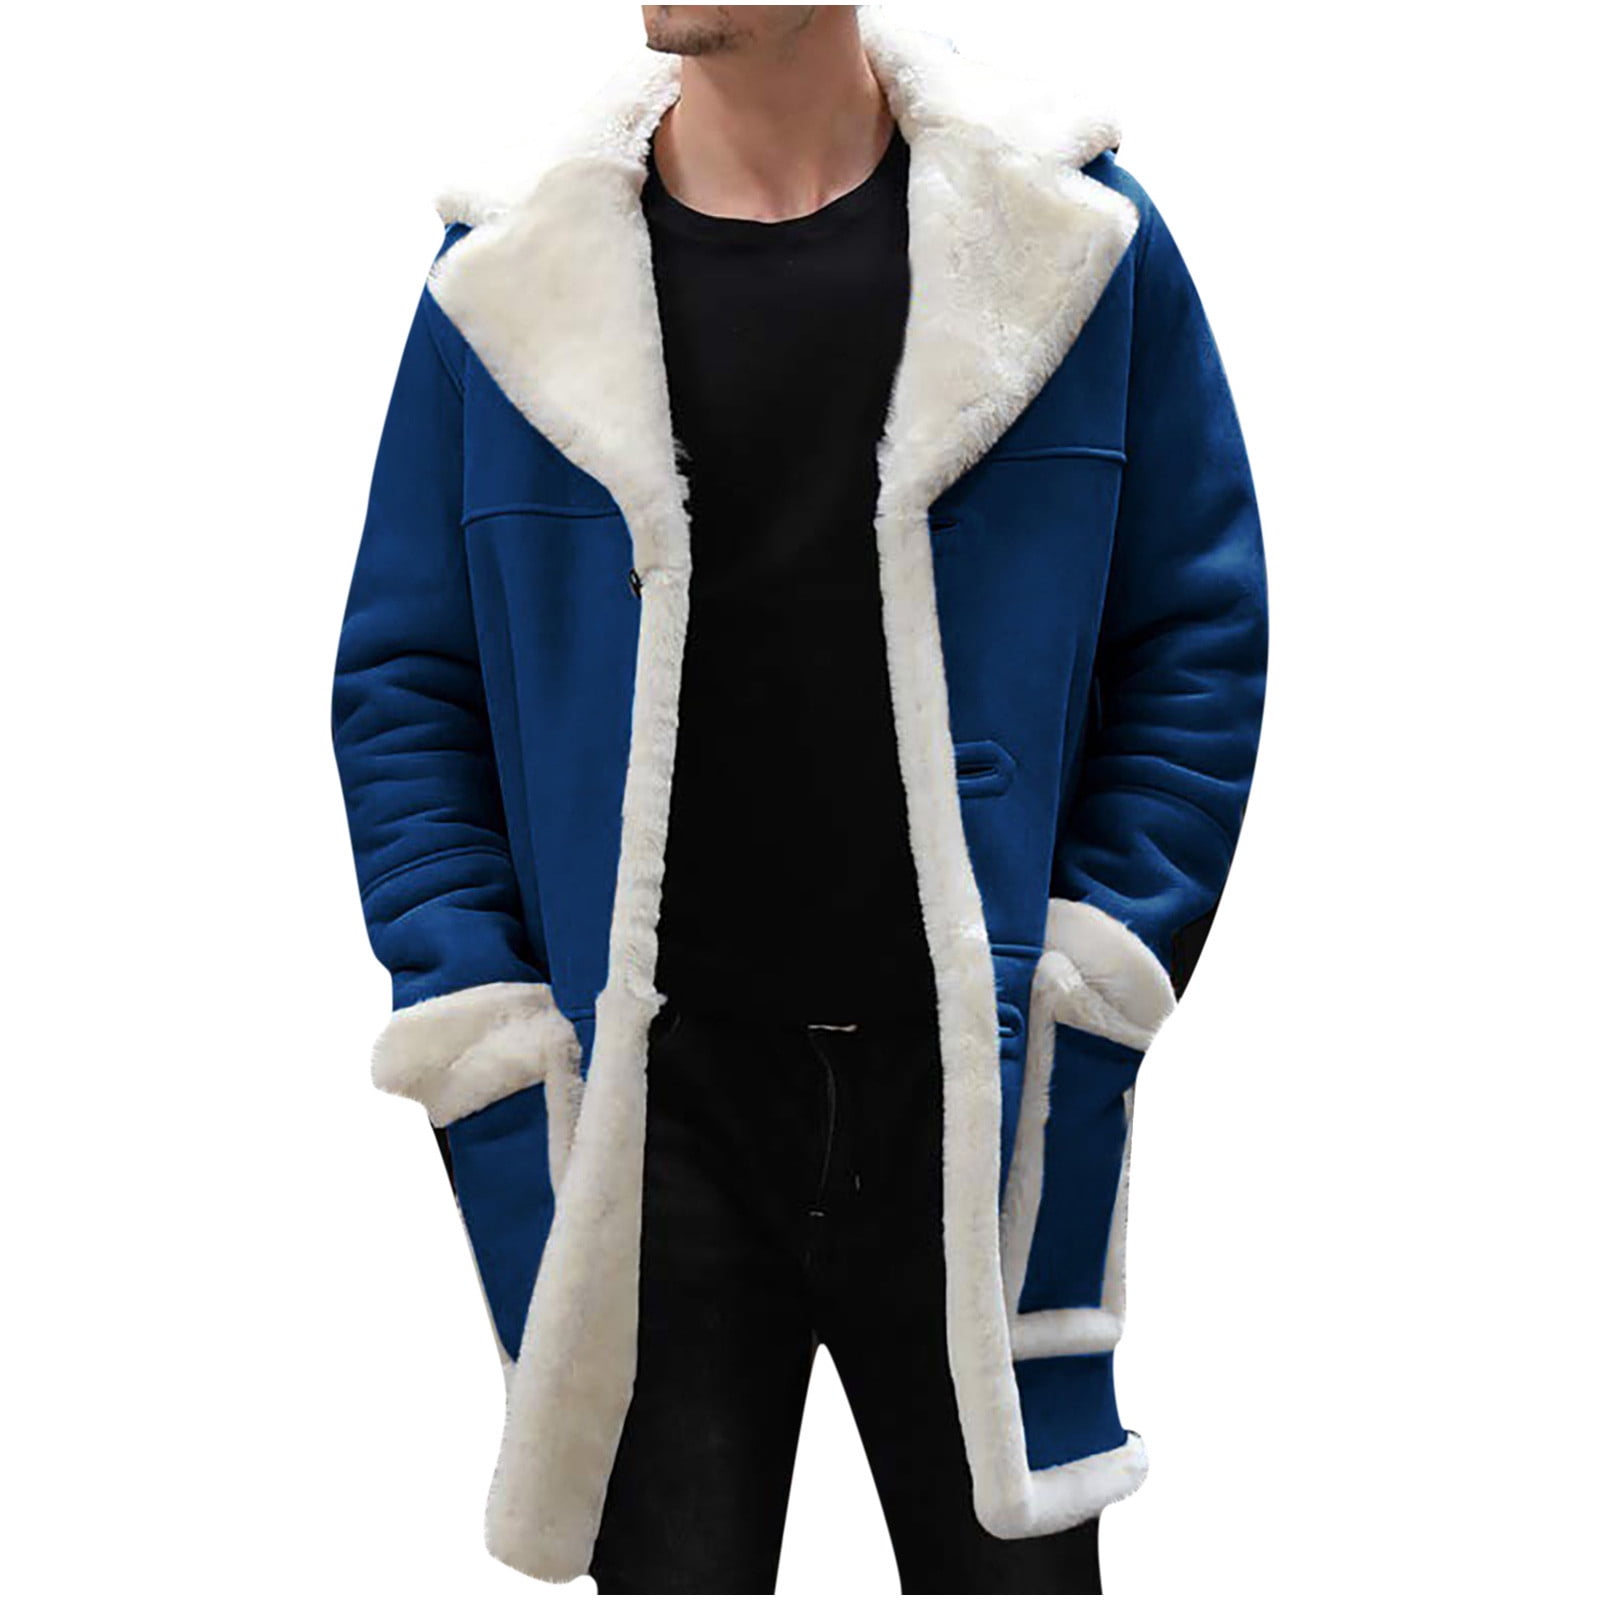 Men's leather and shearling lined - Jackets & Coats